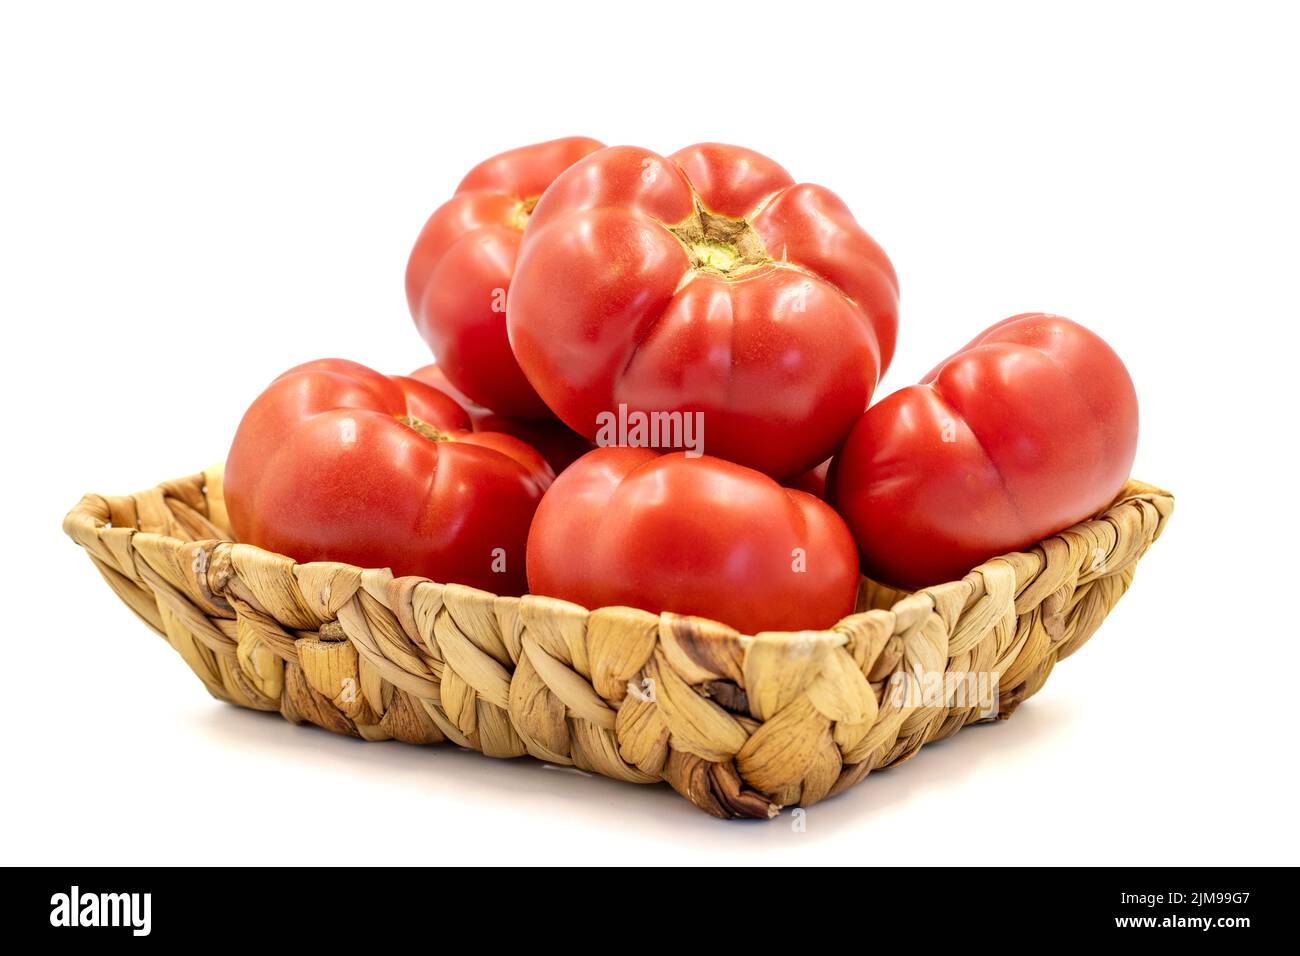 Ripe Tomatoes. Fresh and raw red tomatoes in basket isolated on white background. Organic food. close up Stock Photo